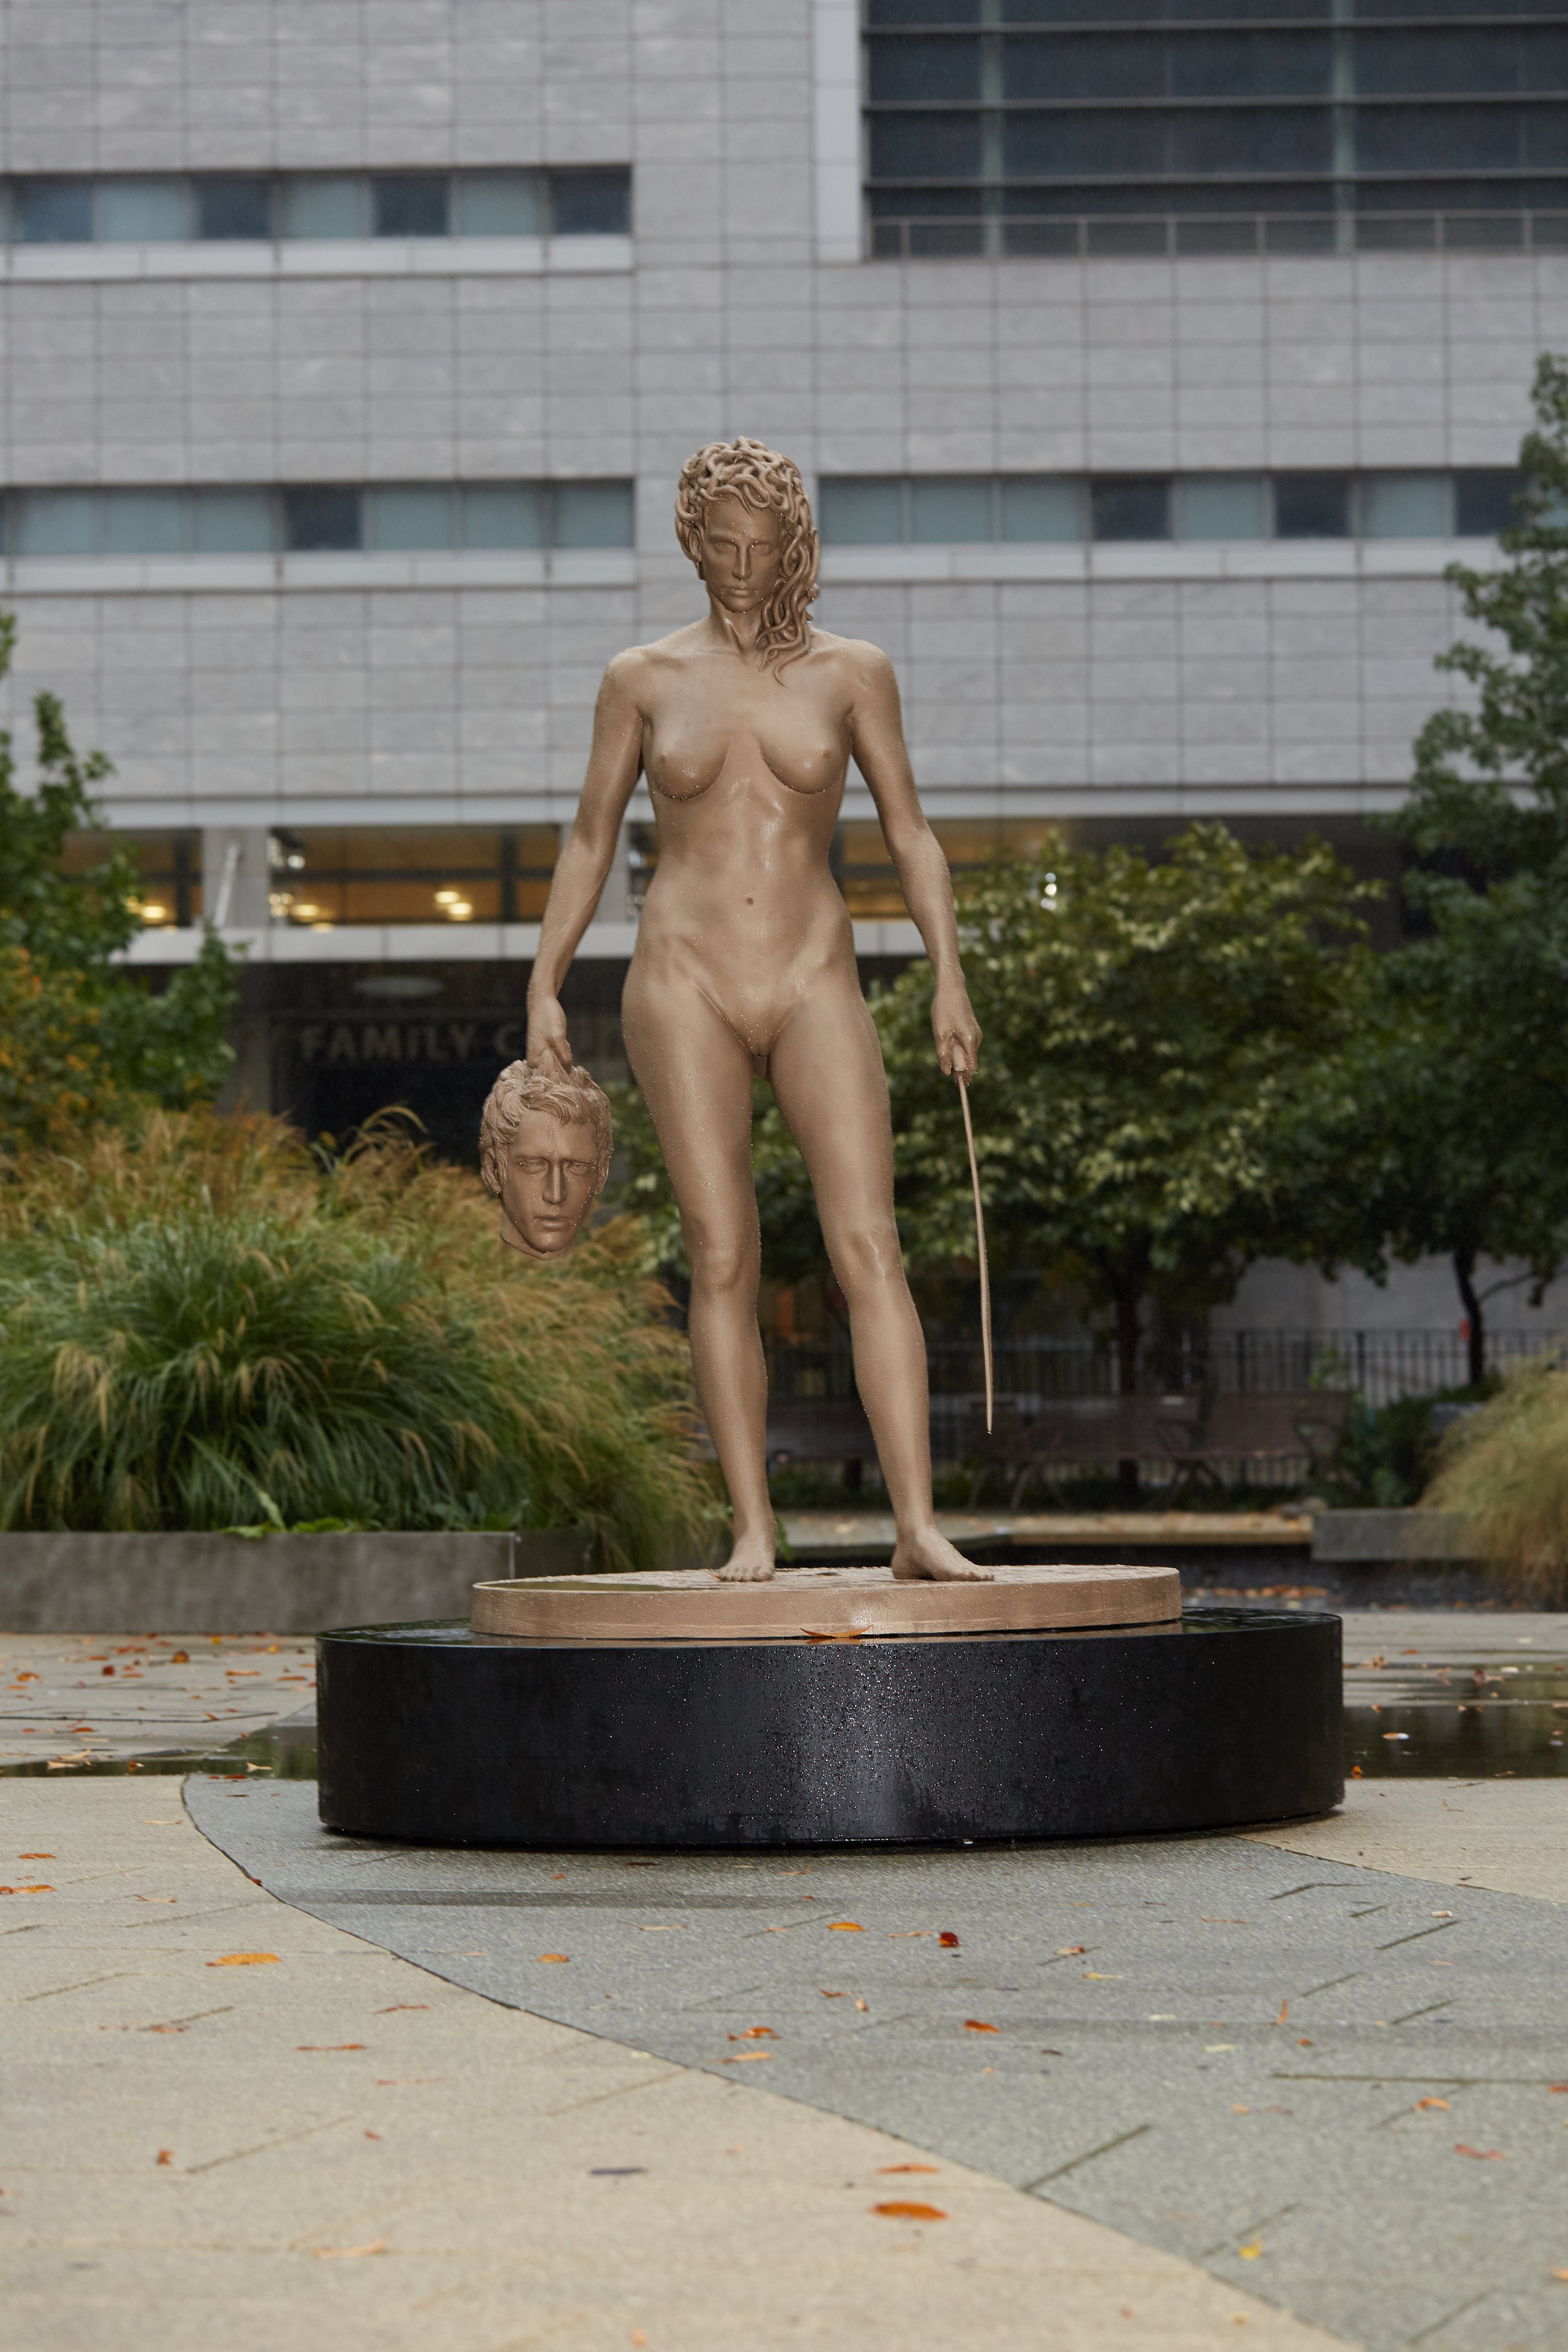 The Artist Behind a (Very Questionable) Nude Public Statue of Medusa as a Feminist Avenger Defends His Work pic